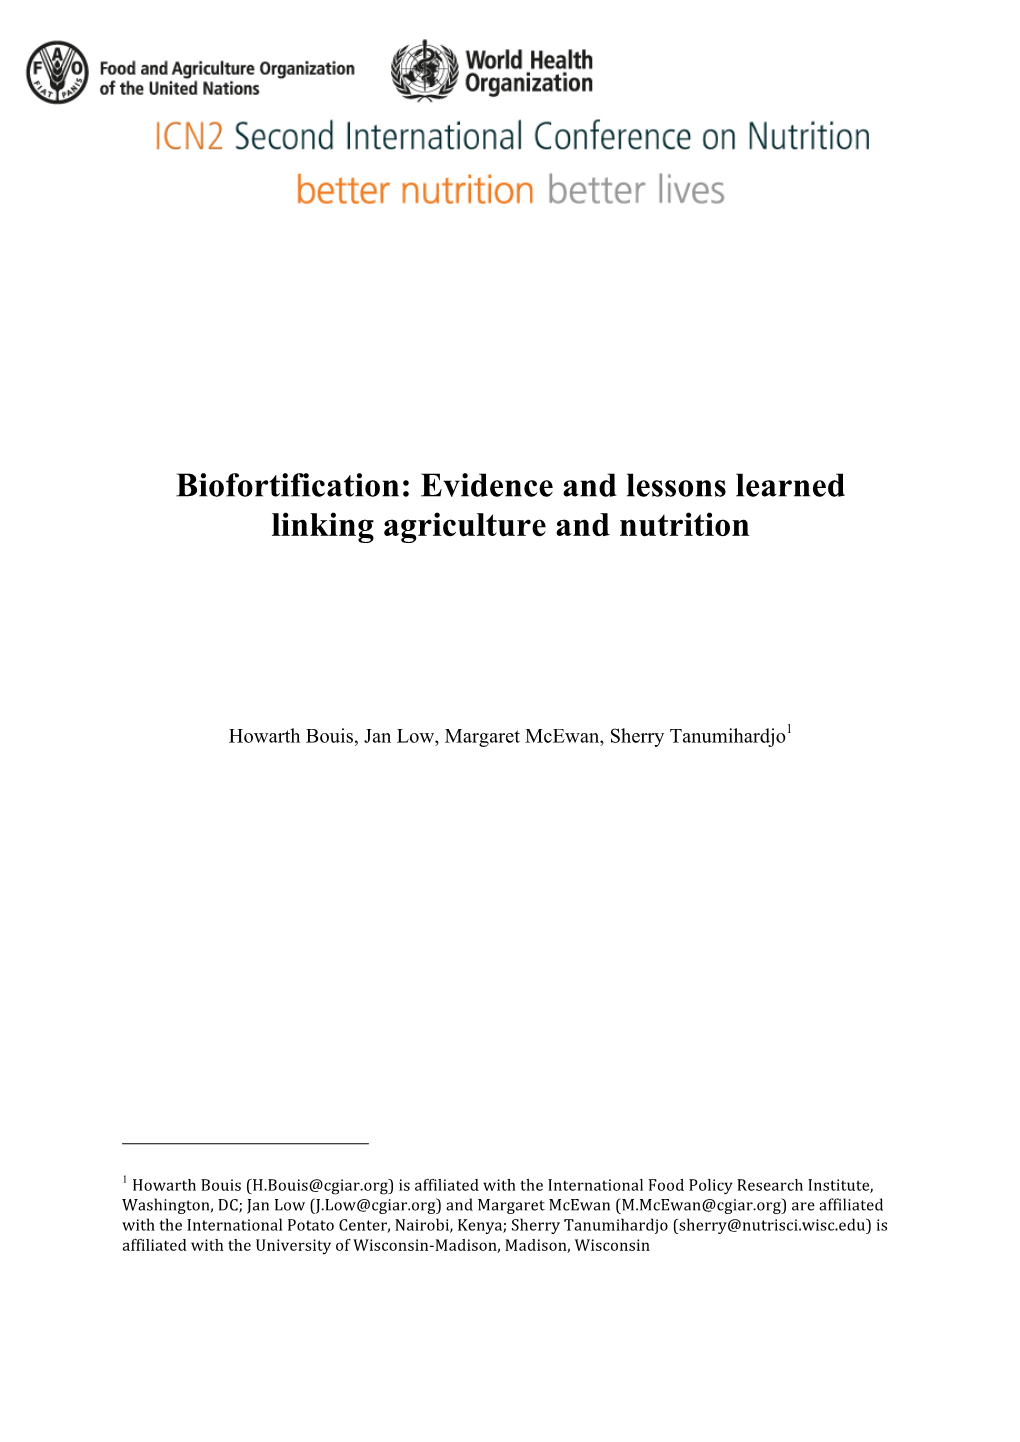 Biofortification: Evidence and Lessons Learned Linking Agriculture and Nutrition